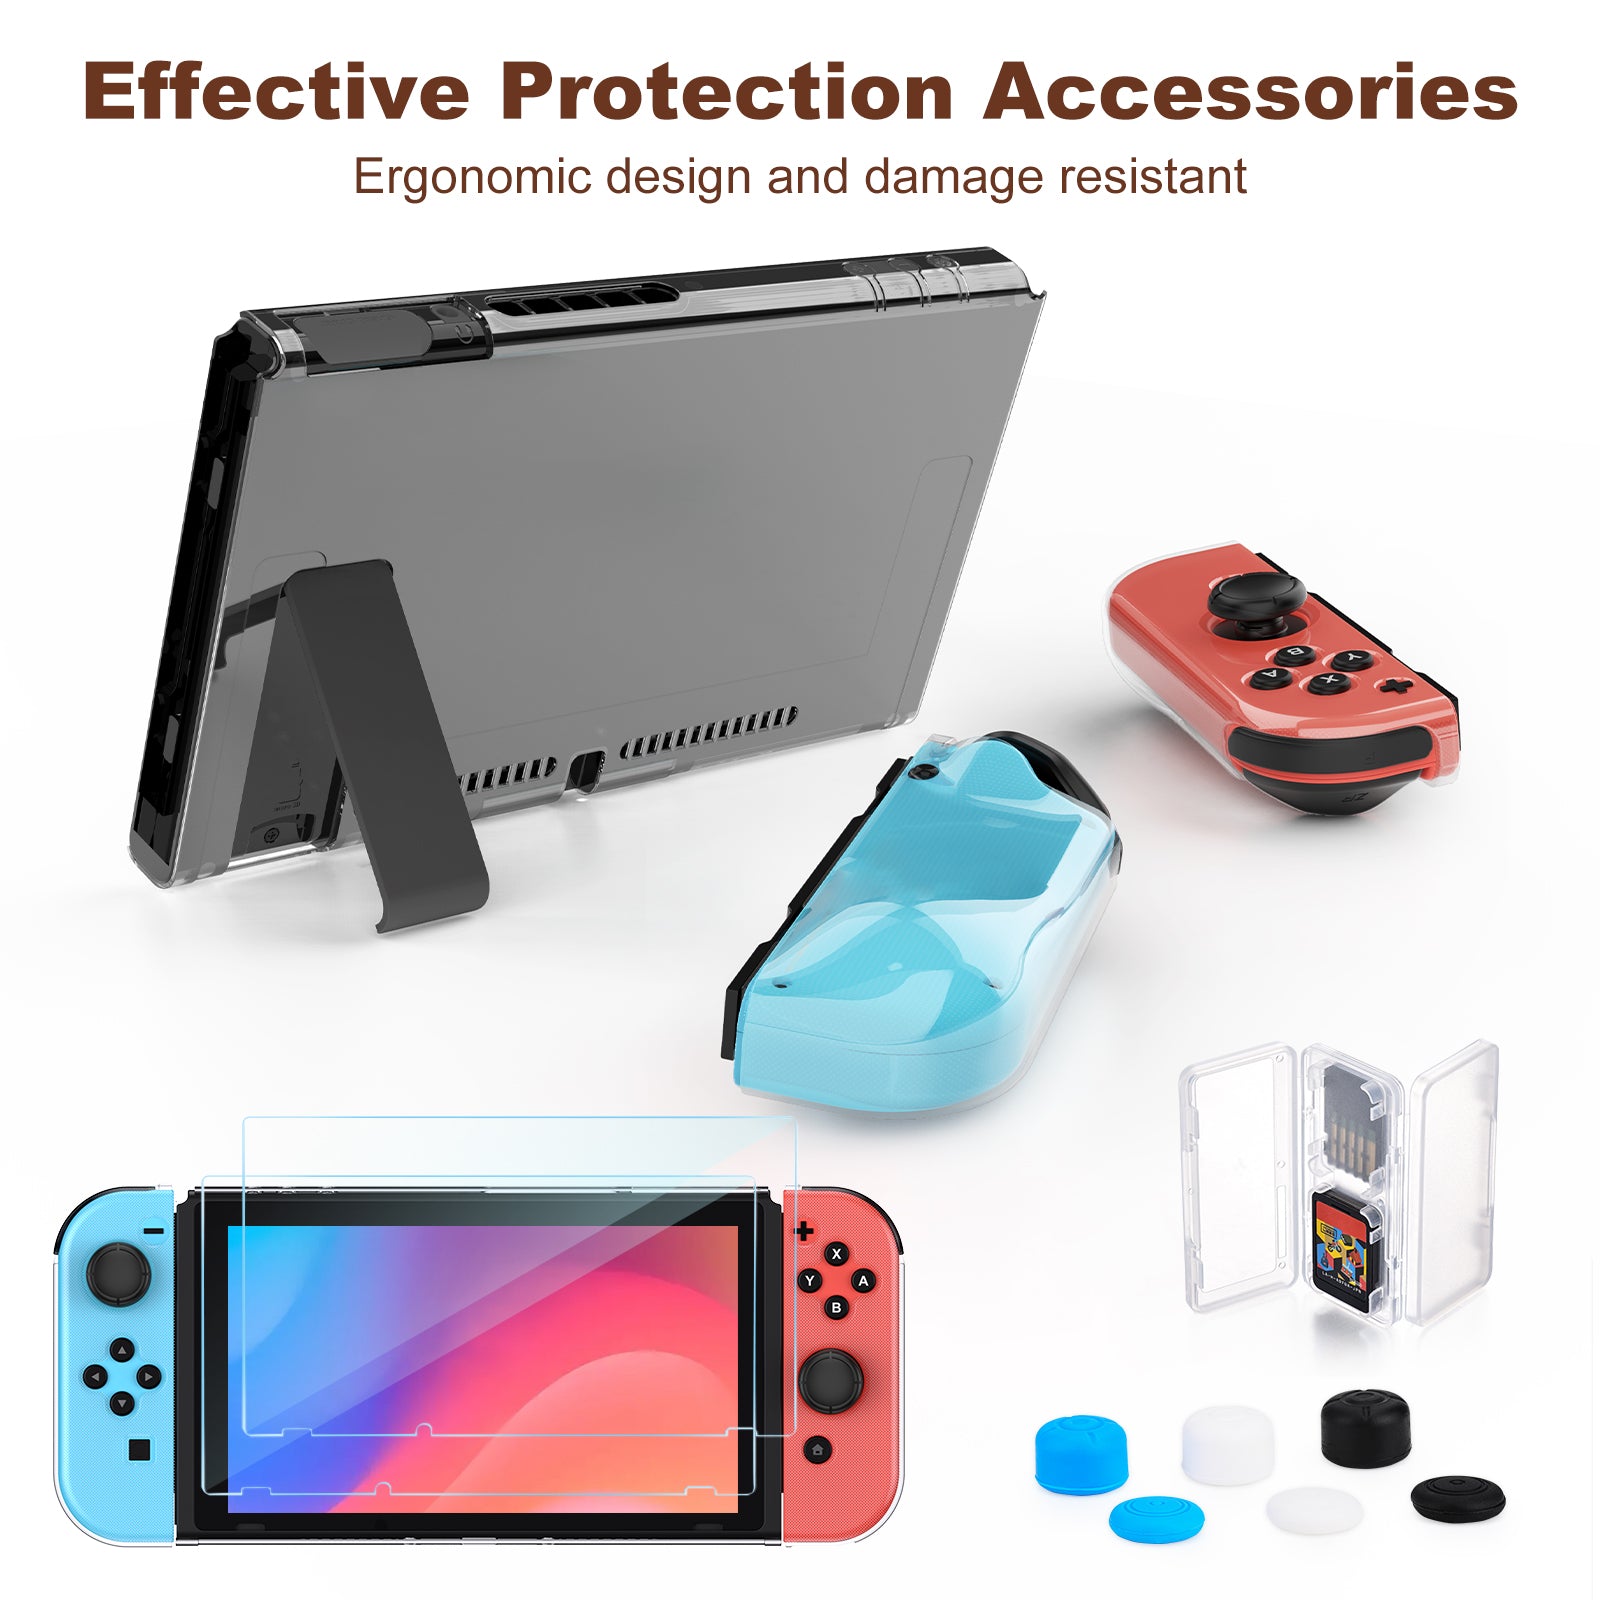 Younik PU Switch Carrying Case, Case for Nintendo Switch